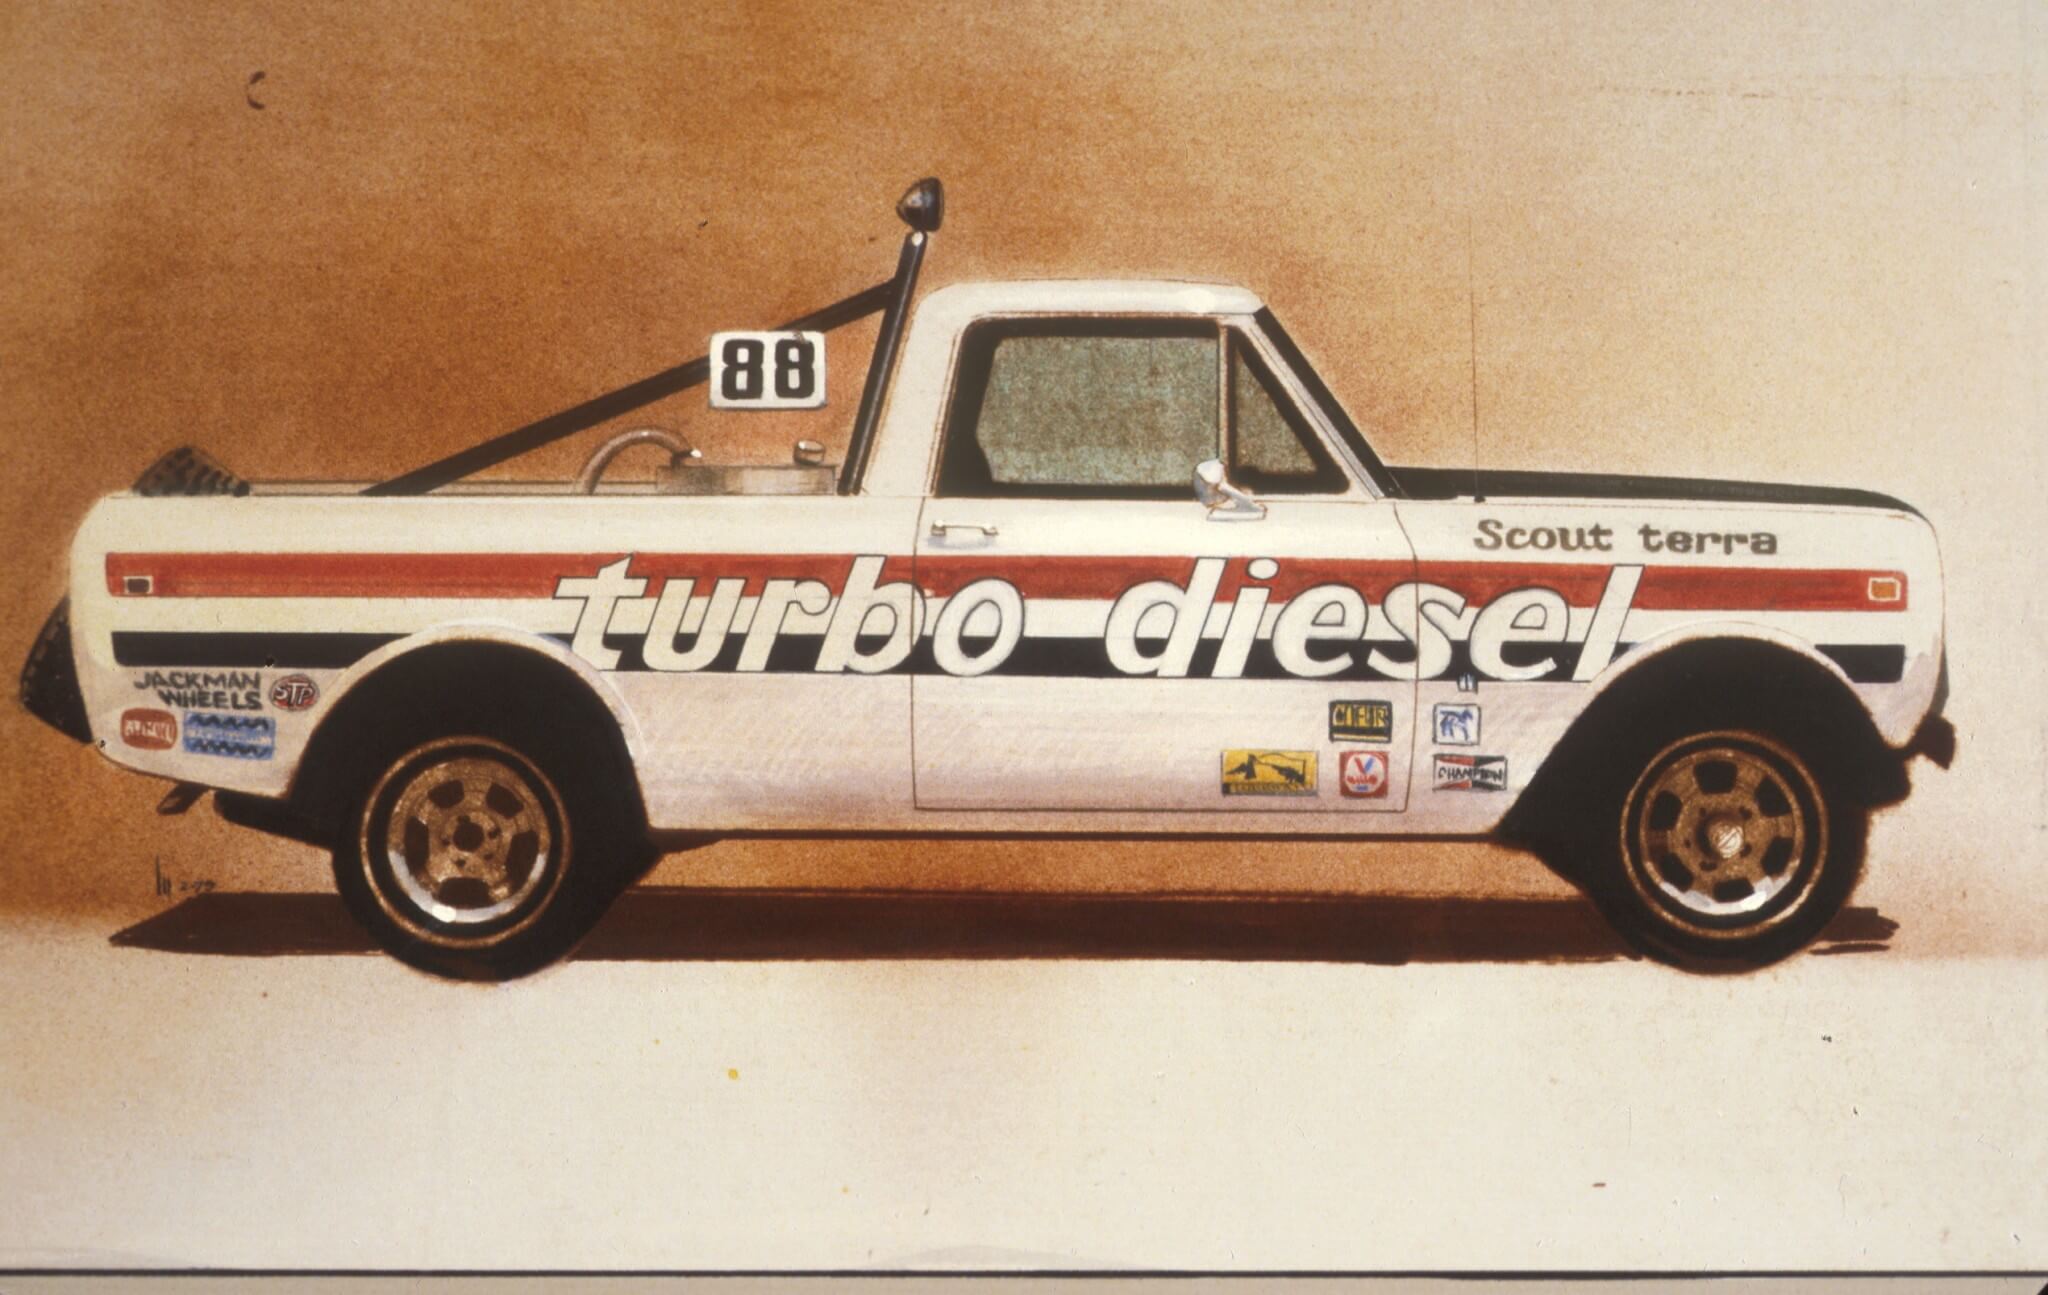 When the turbo diesel debuted, several Scout racers jumped on the bandwagon. Jimmy Jones, Jerry Boone and Sherman Balch all ran turbodiesel Scouts in the Baja 500 and 1000 races into the early 1980s. According to a magazine article of the era, in 1979 Jimmy Jones was the first person to finish the Baja 1000 race in a diesel-powered vehicle, and his Scout was also the first turbocharged vehicle to race. He set a record for the lowest fuel expenditure to that time, spending a mere $30 run the 1,000 miles. 